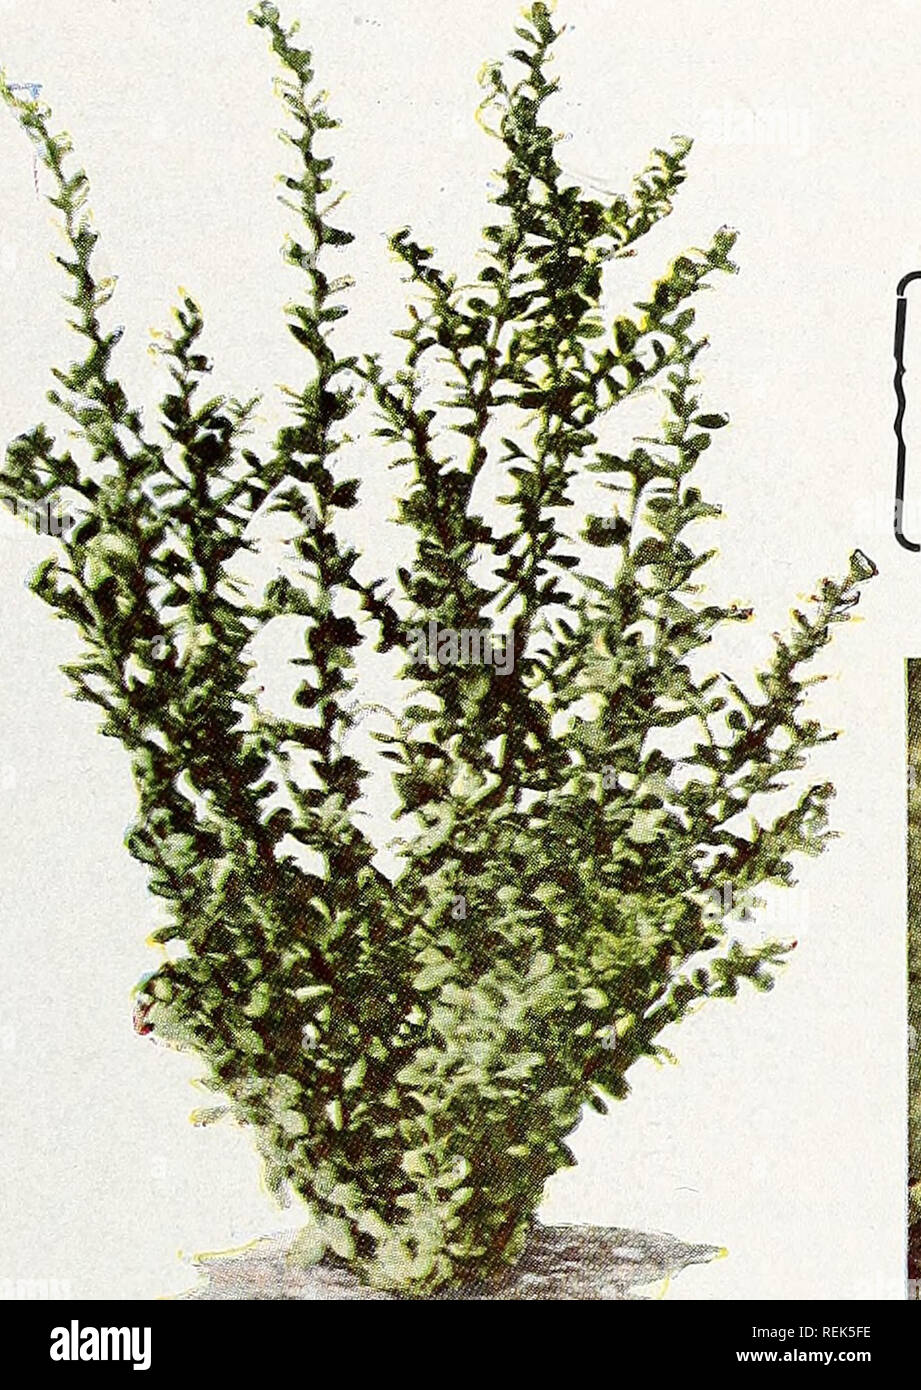 . C. M. Hobbs &amp; Sons Incorporated. Nurseries Horticulture Catalogs; Evergreens Catalogs; Fruit trees Catalogs; Climbing plants Catalogs; Shrubs Catalogs; Vegetables Catalogs. Mahonia Ilex ILEX crenata bullata (Convex Leaf Holly). Compact spread- ing Evergreen shrub with small convex leaves on arched branches. Often planted around foundations and for hedges. I. glabra (Inkberry). An Ever- green shrub of the Holly fam- ily for sun or shade with leaves turning a dark color by fall and producing many shiny black berries which are out- standing in a group planting. I. opaca (American Holly). Mo Stock Photo